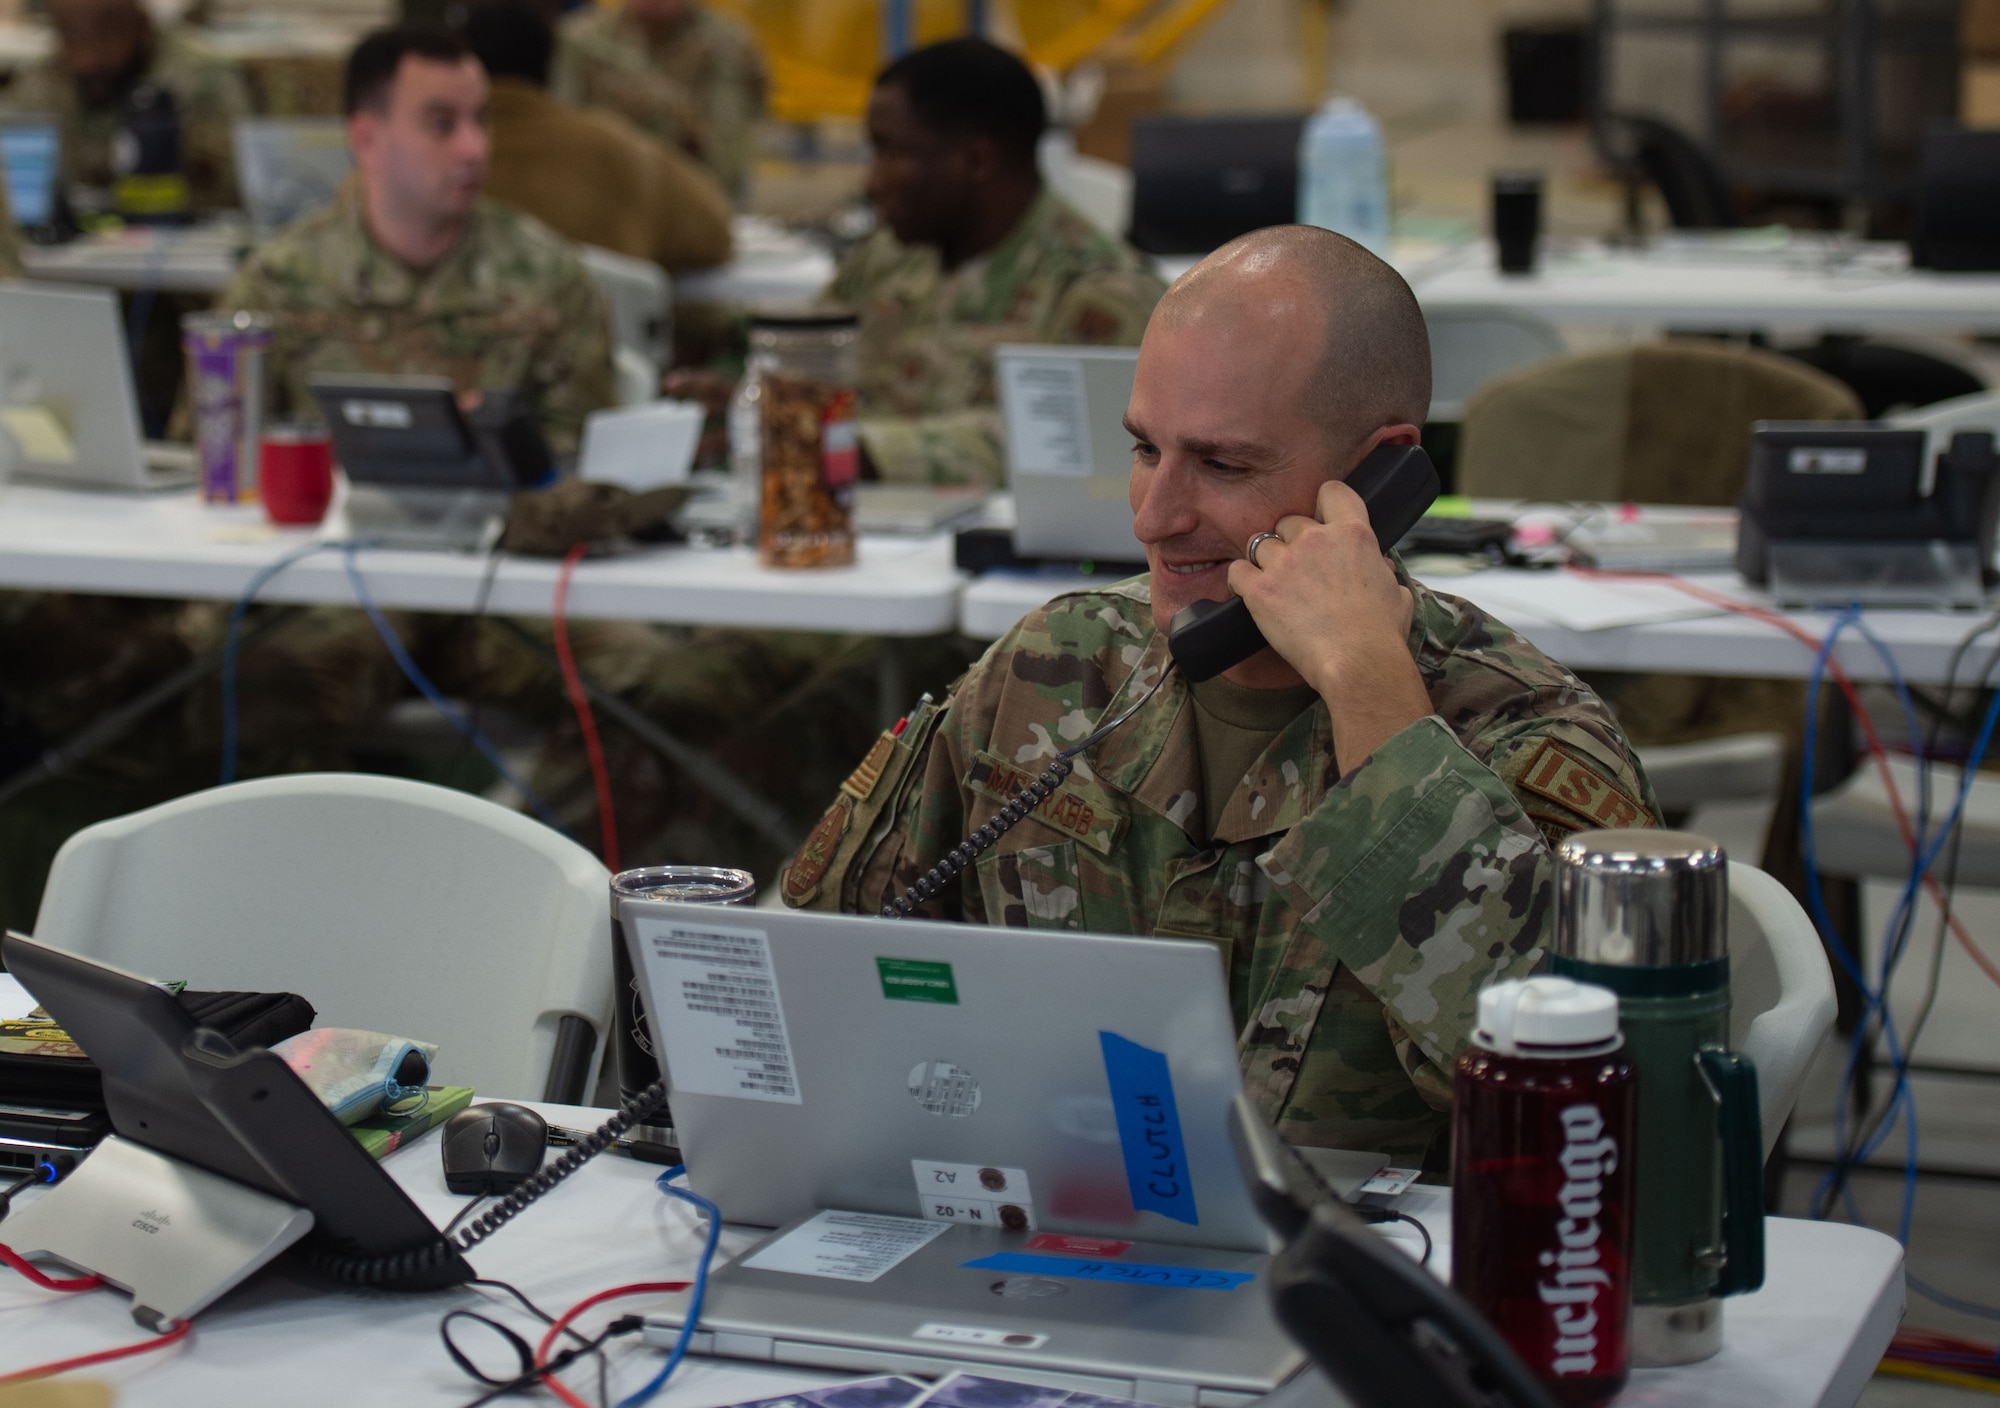 Moody joins Discord to streamline communication > Moody Air Force